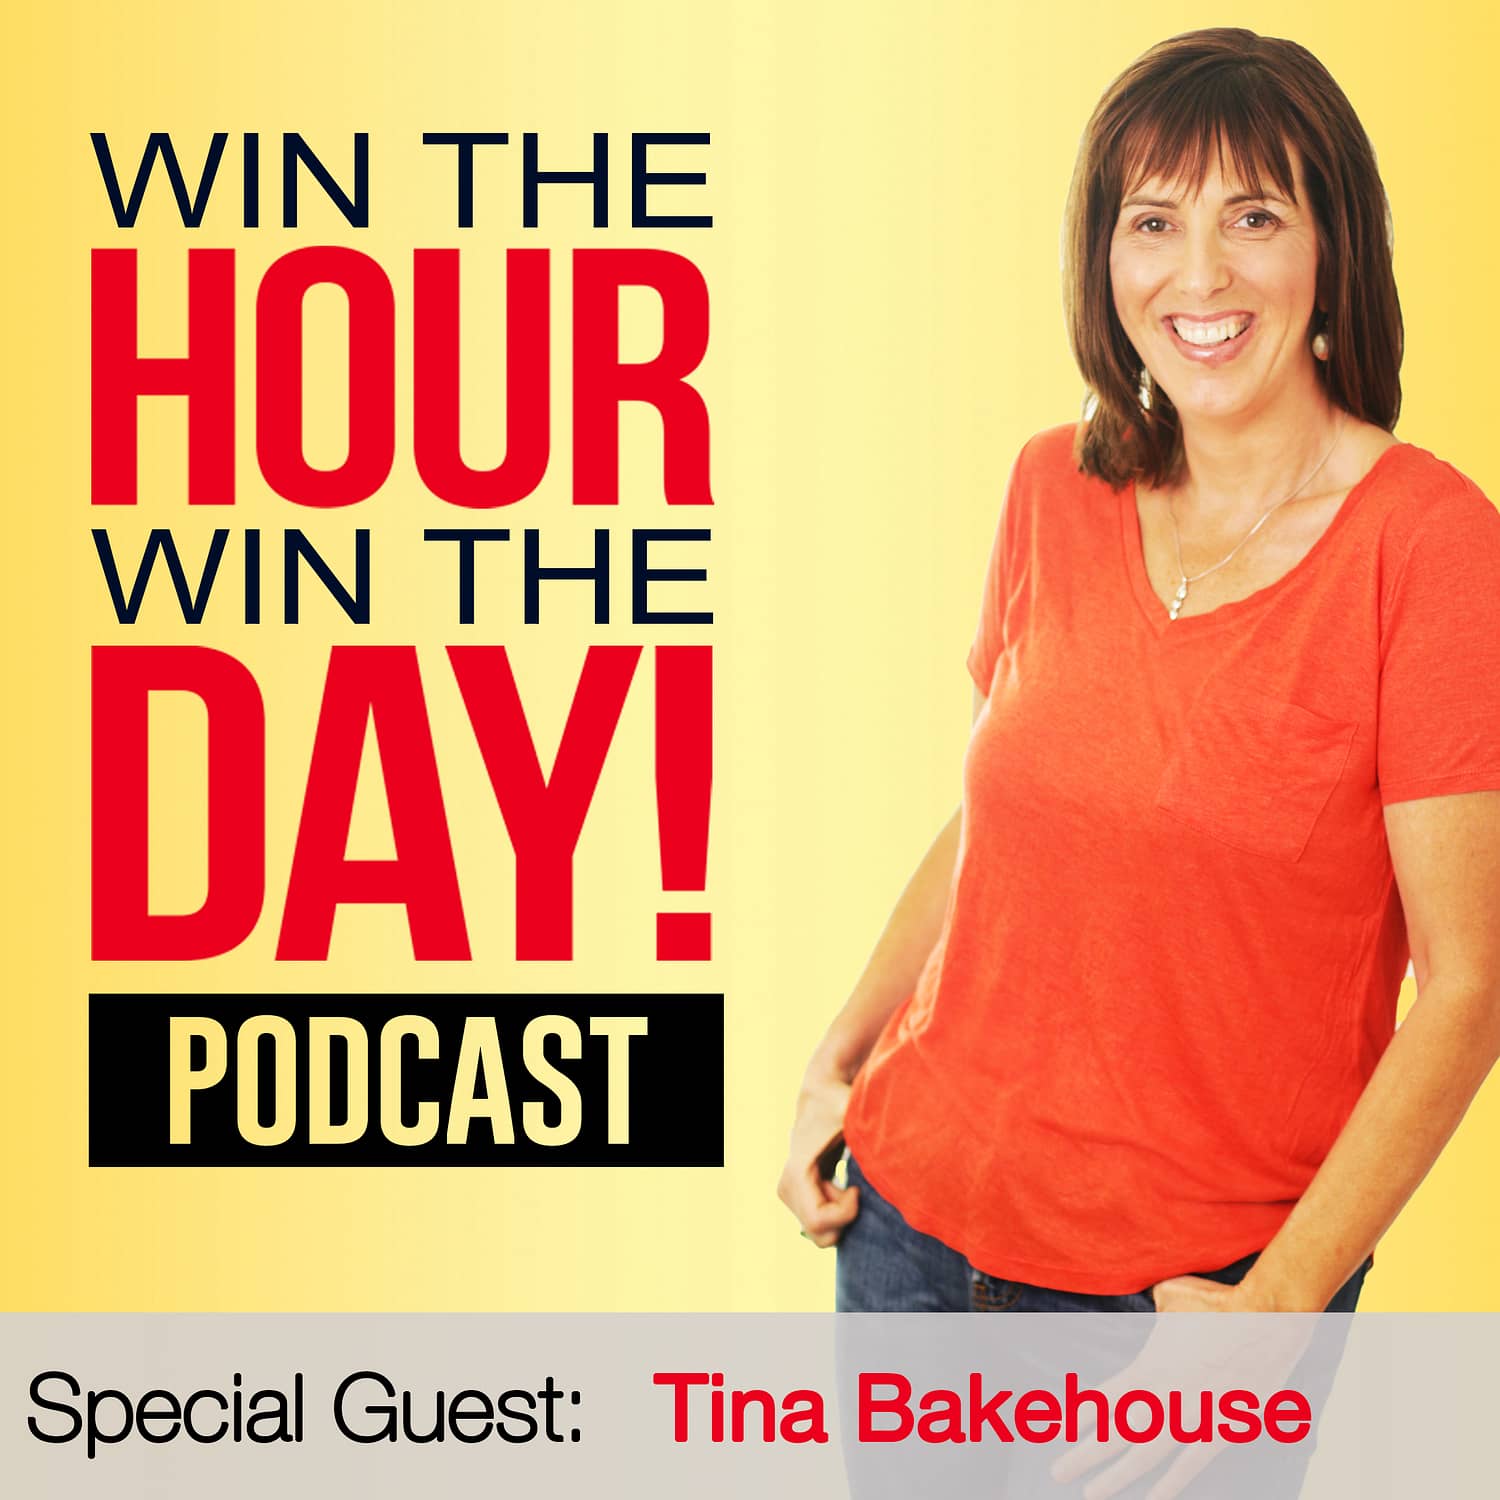 Storytelling Techniques To Grow Your Business! with Tina Bakehouse